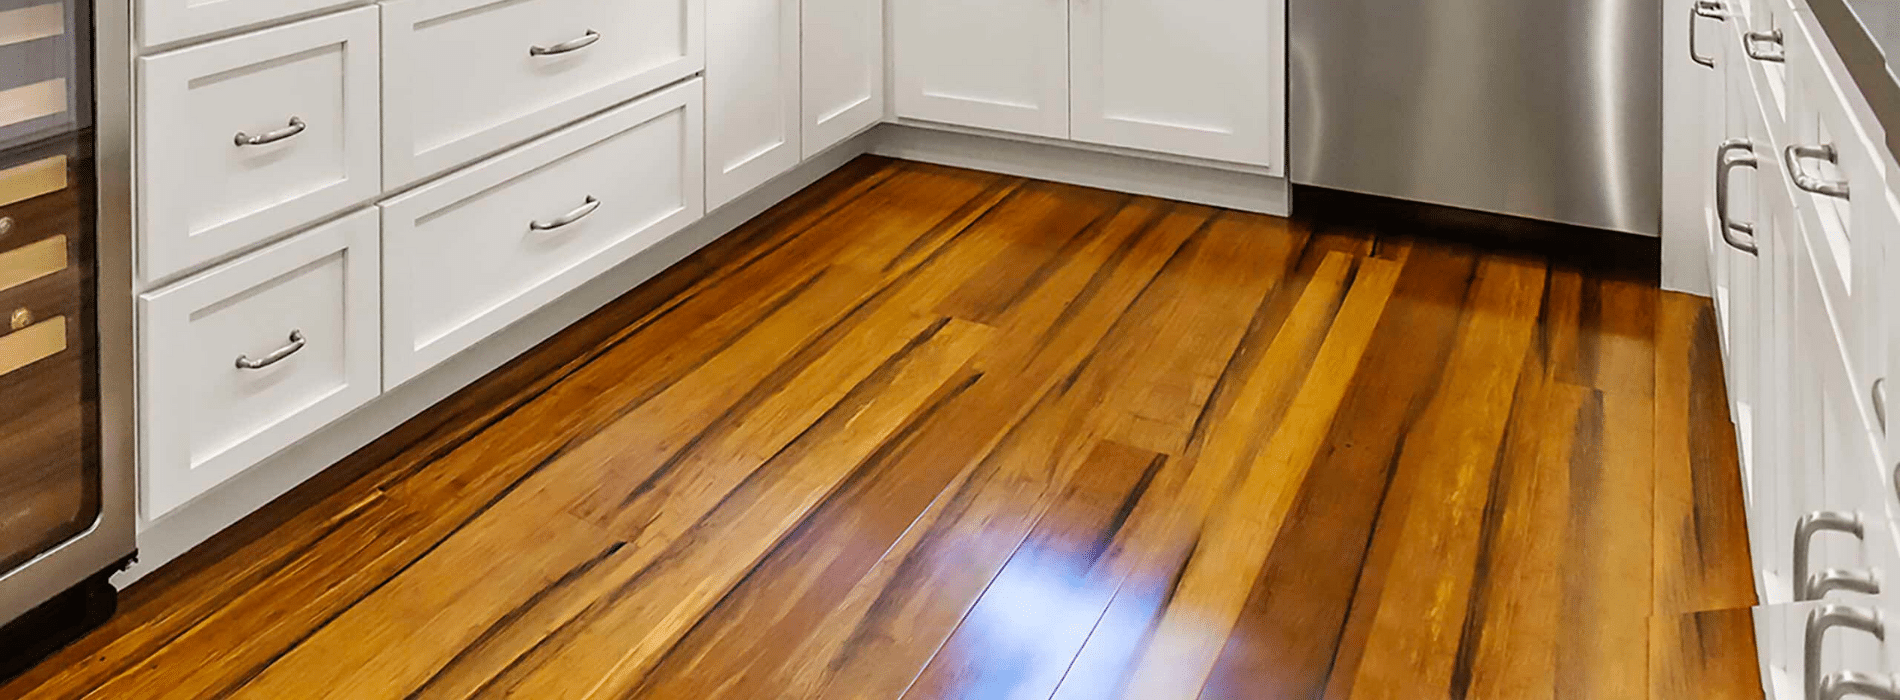 Revitalized engineered oak floors by Mr Sander® in Greenwich, SE10. Meticulously restored to showcase natural beauty. Mid-oak stain adds warmth and charm. Junckers Strong satin finish ensures lasting durability. Marvel at the remarkable transformation achieved by Mr Sander®.